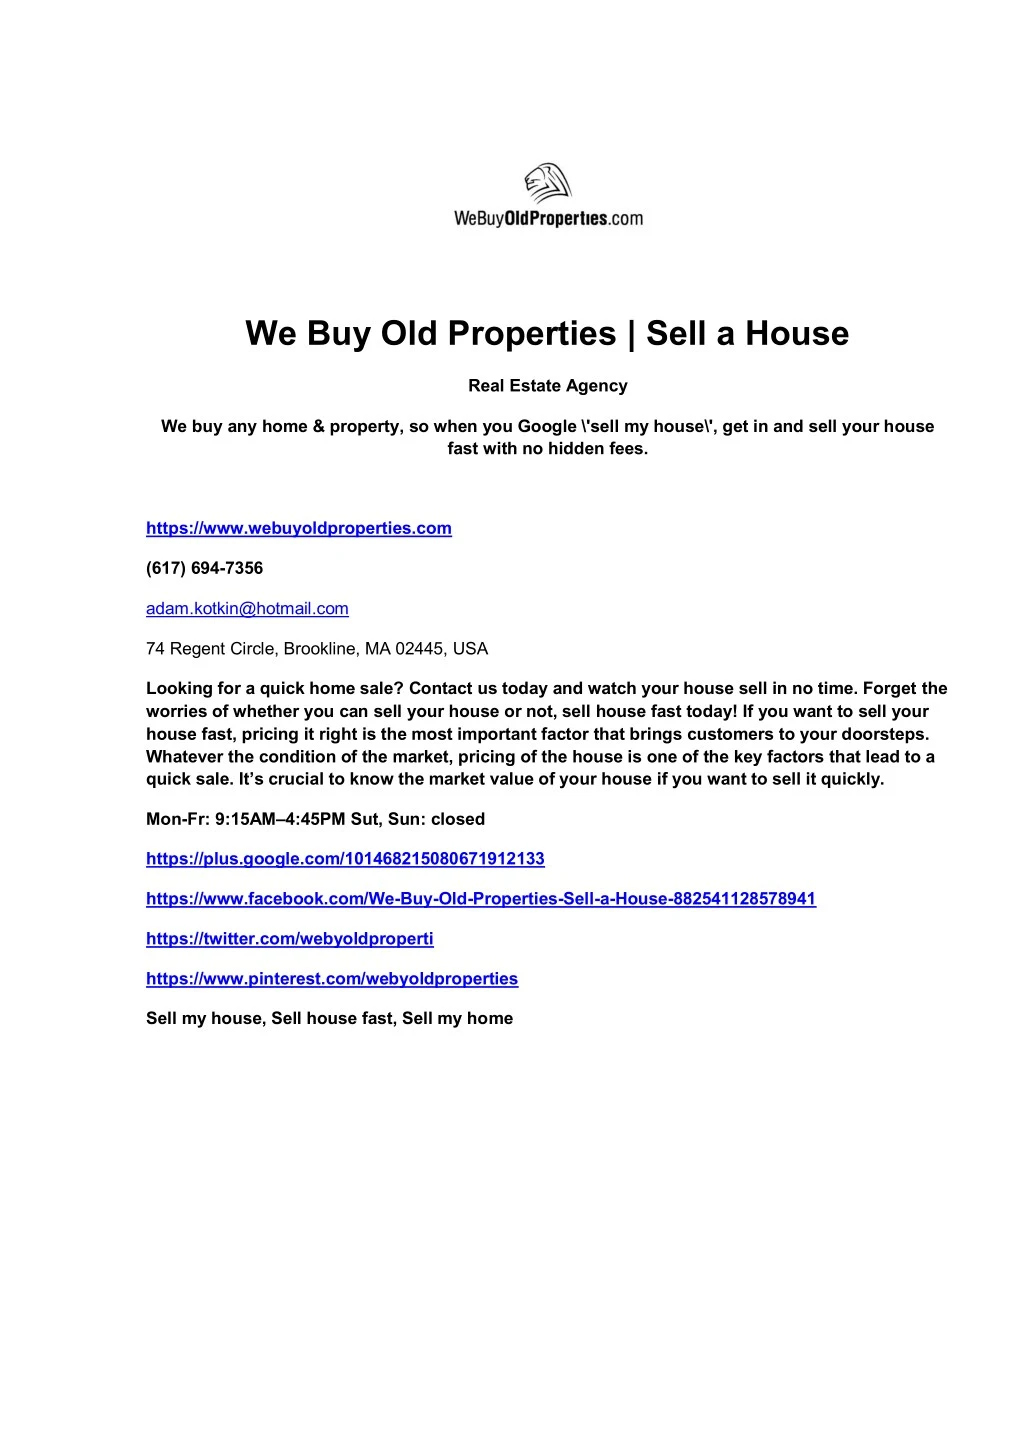 we buy old properties sell a house